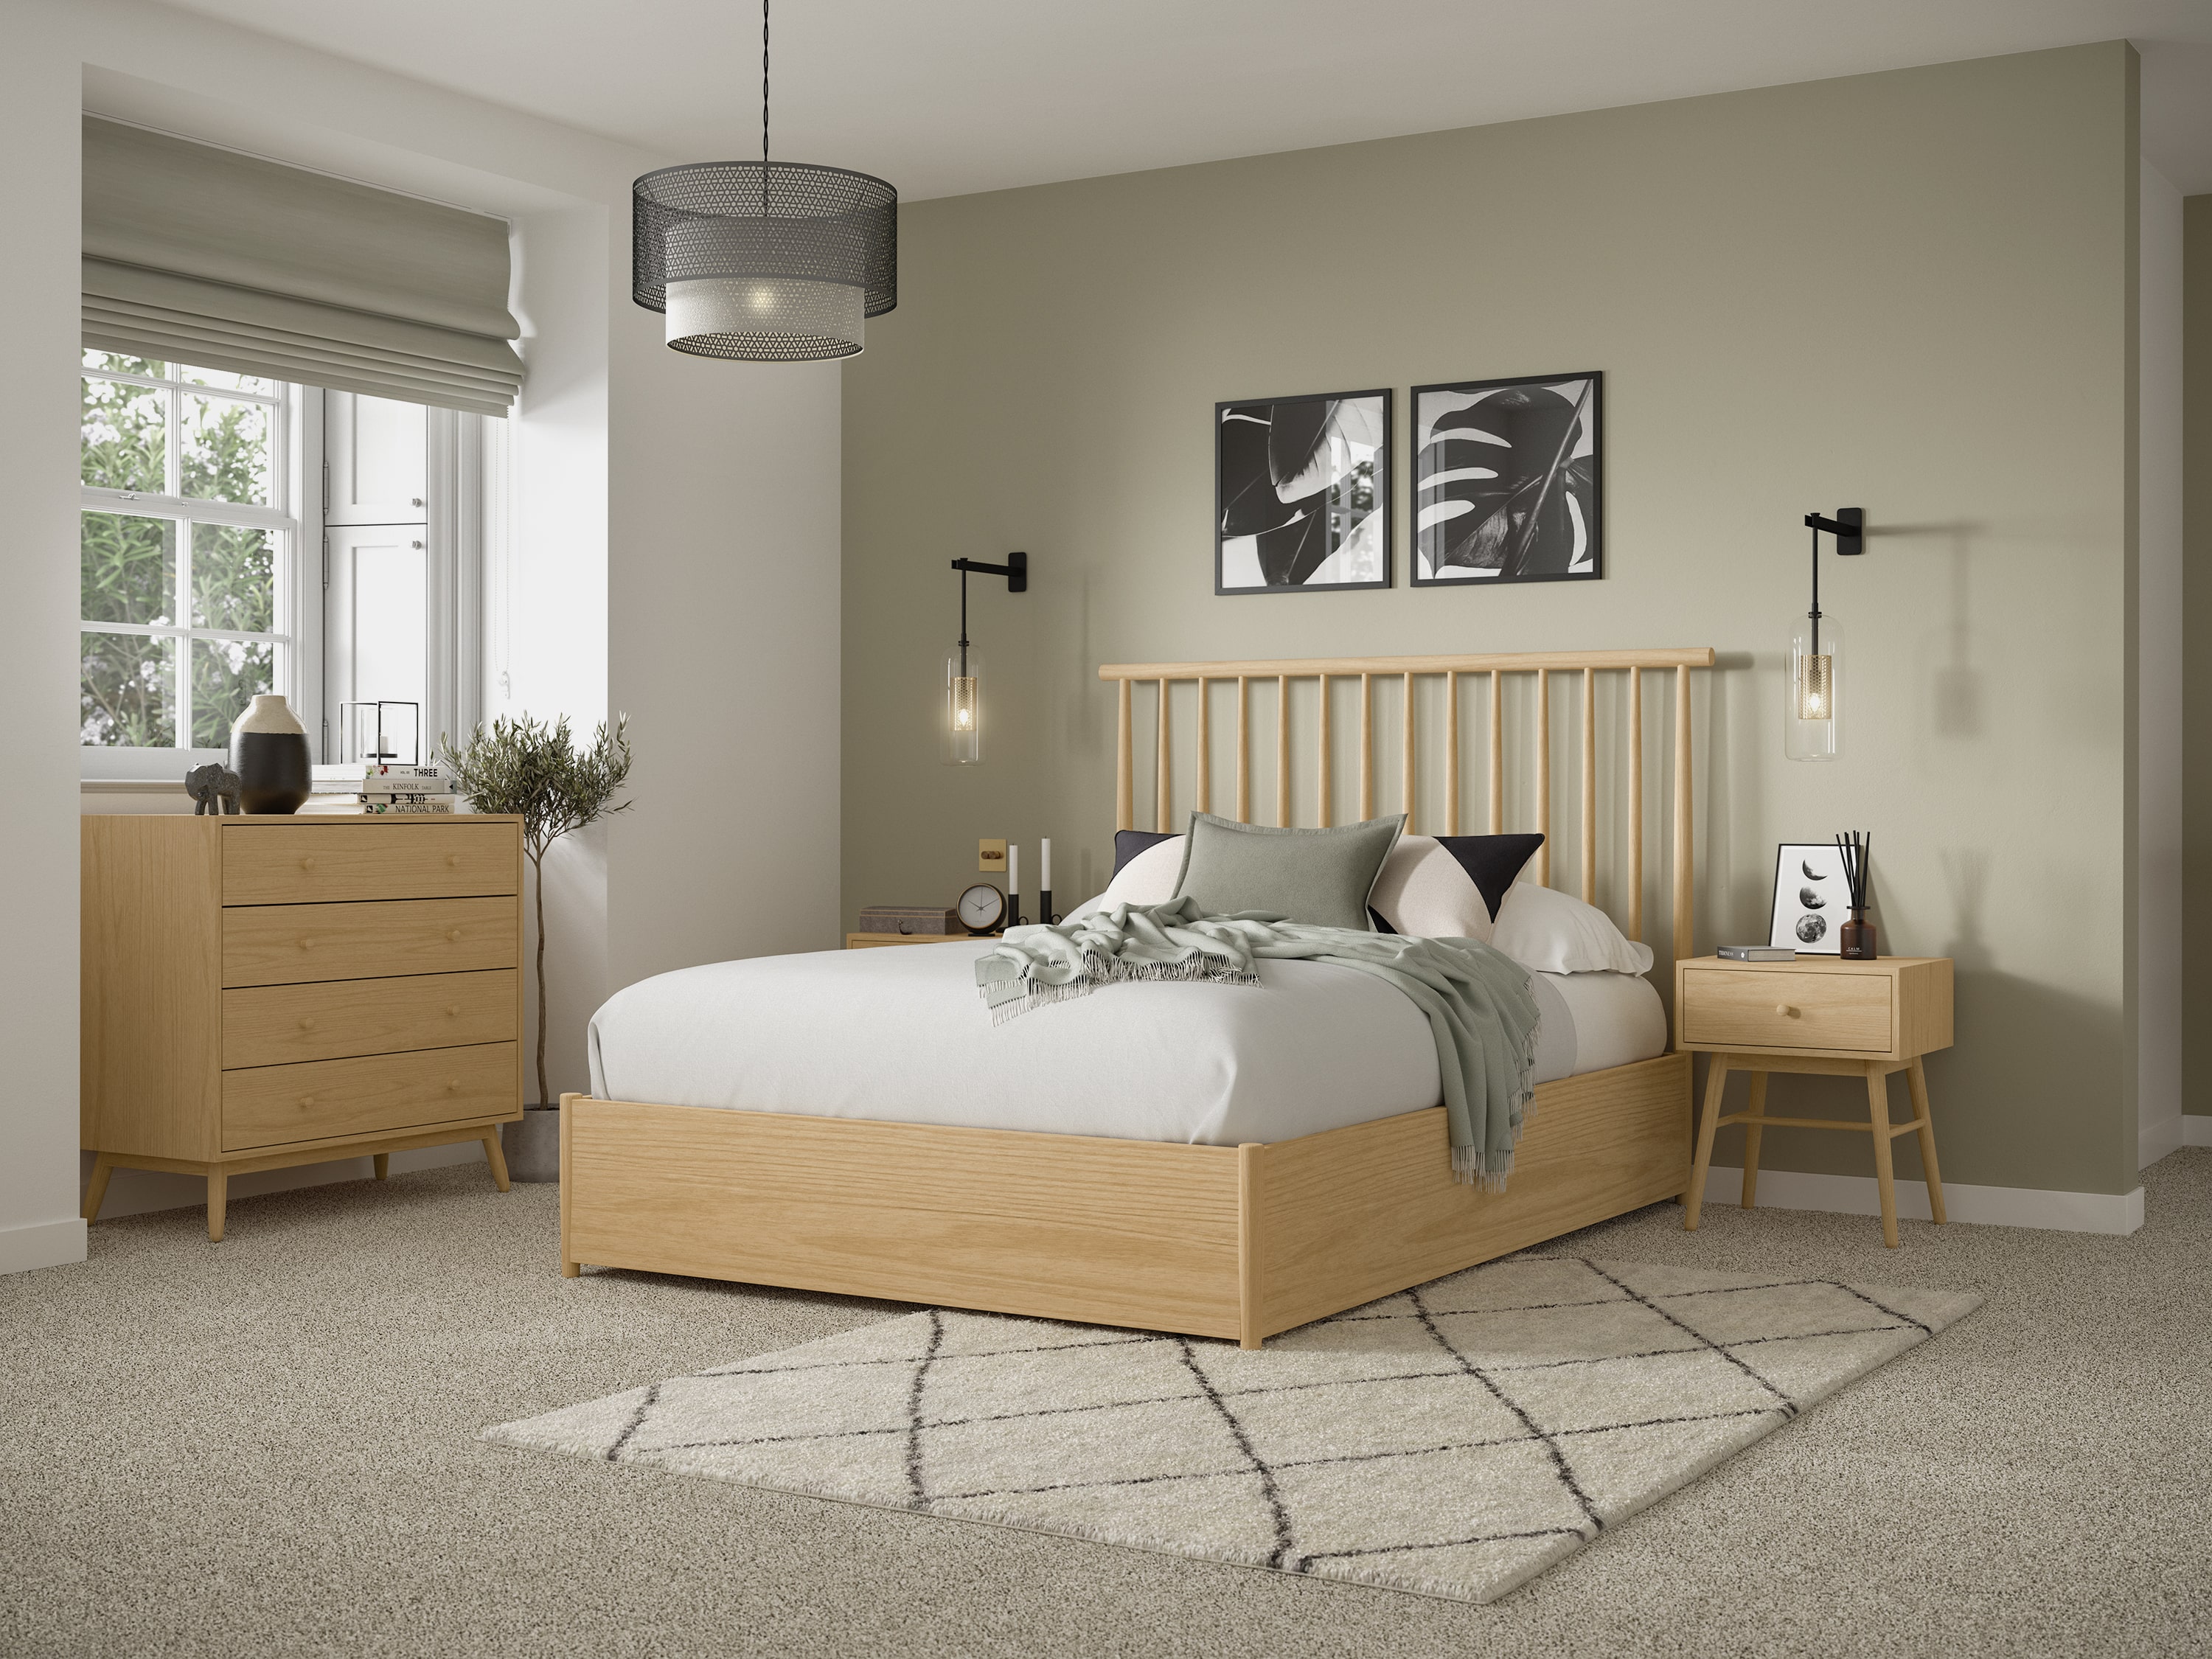 6 Bedroom Ideas and Trends for 2024 - Bensons for Beds